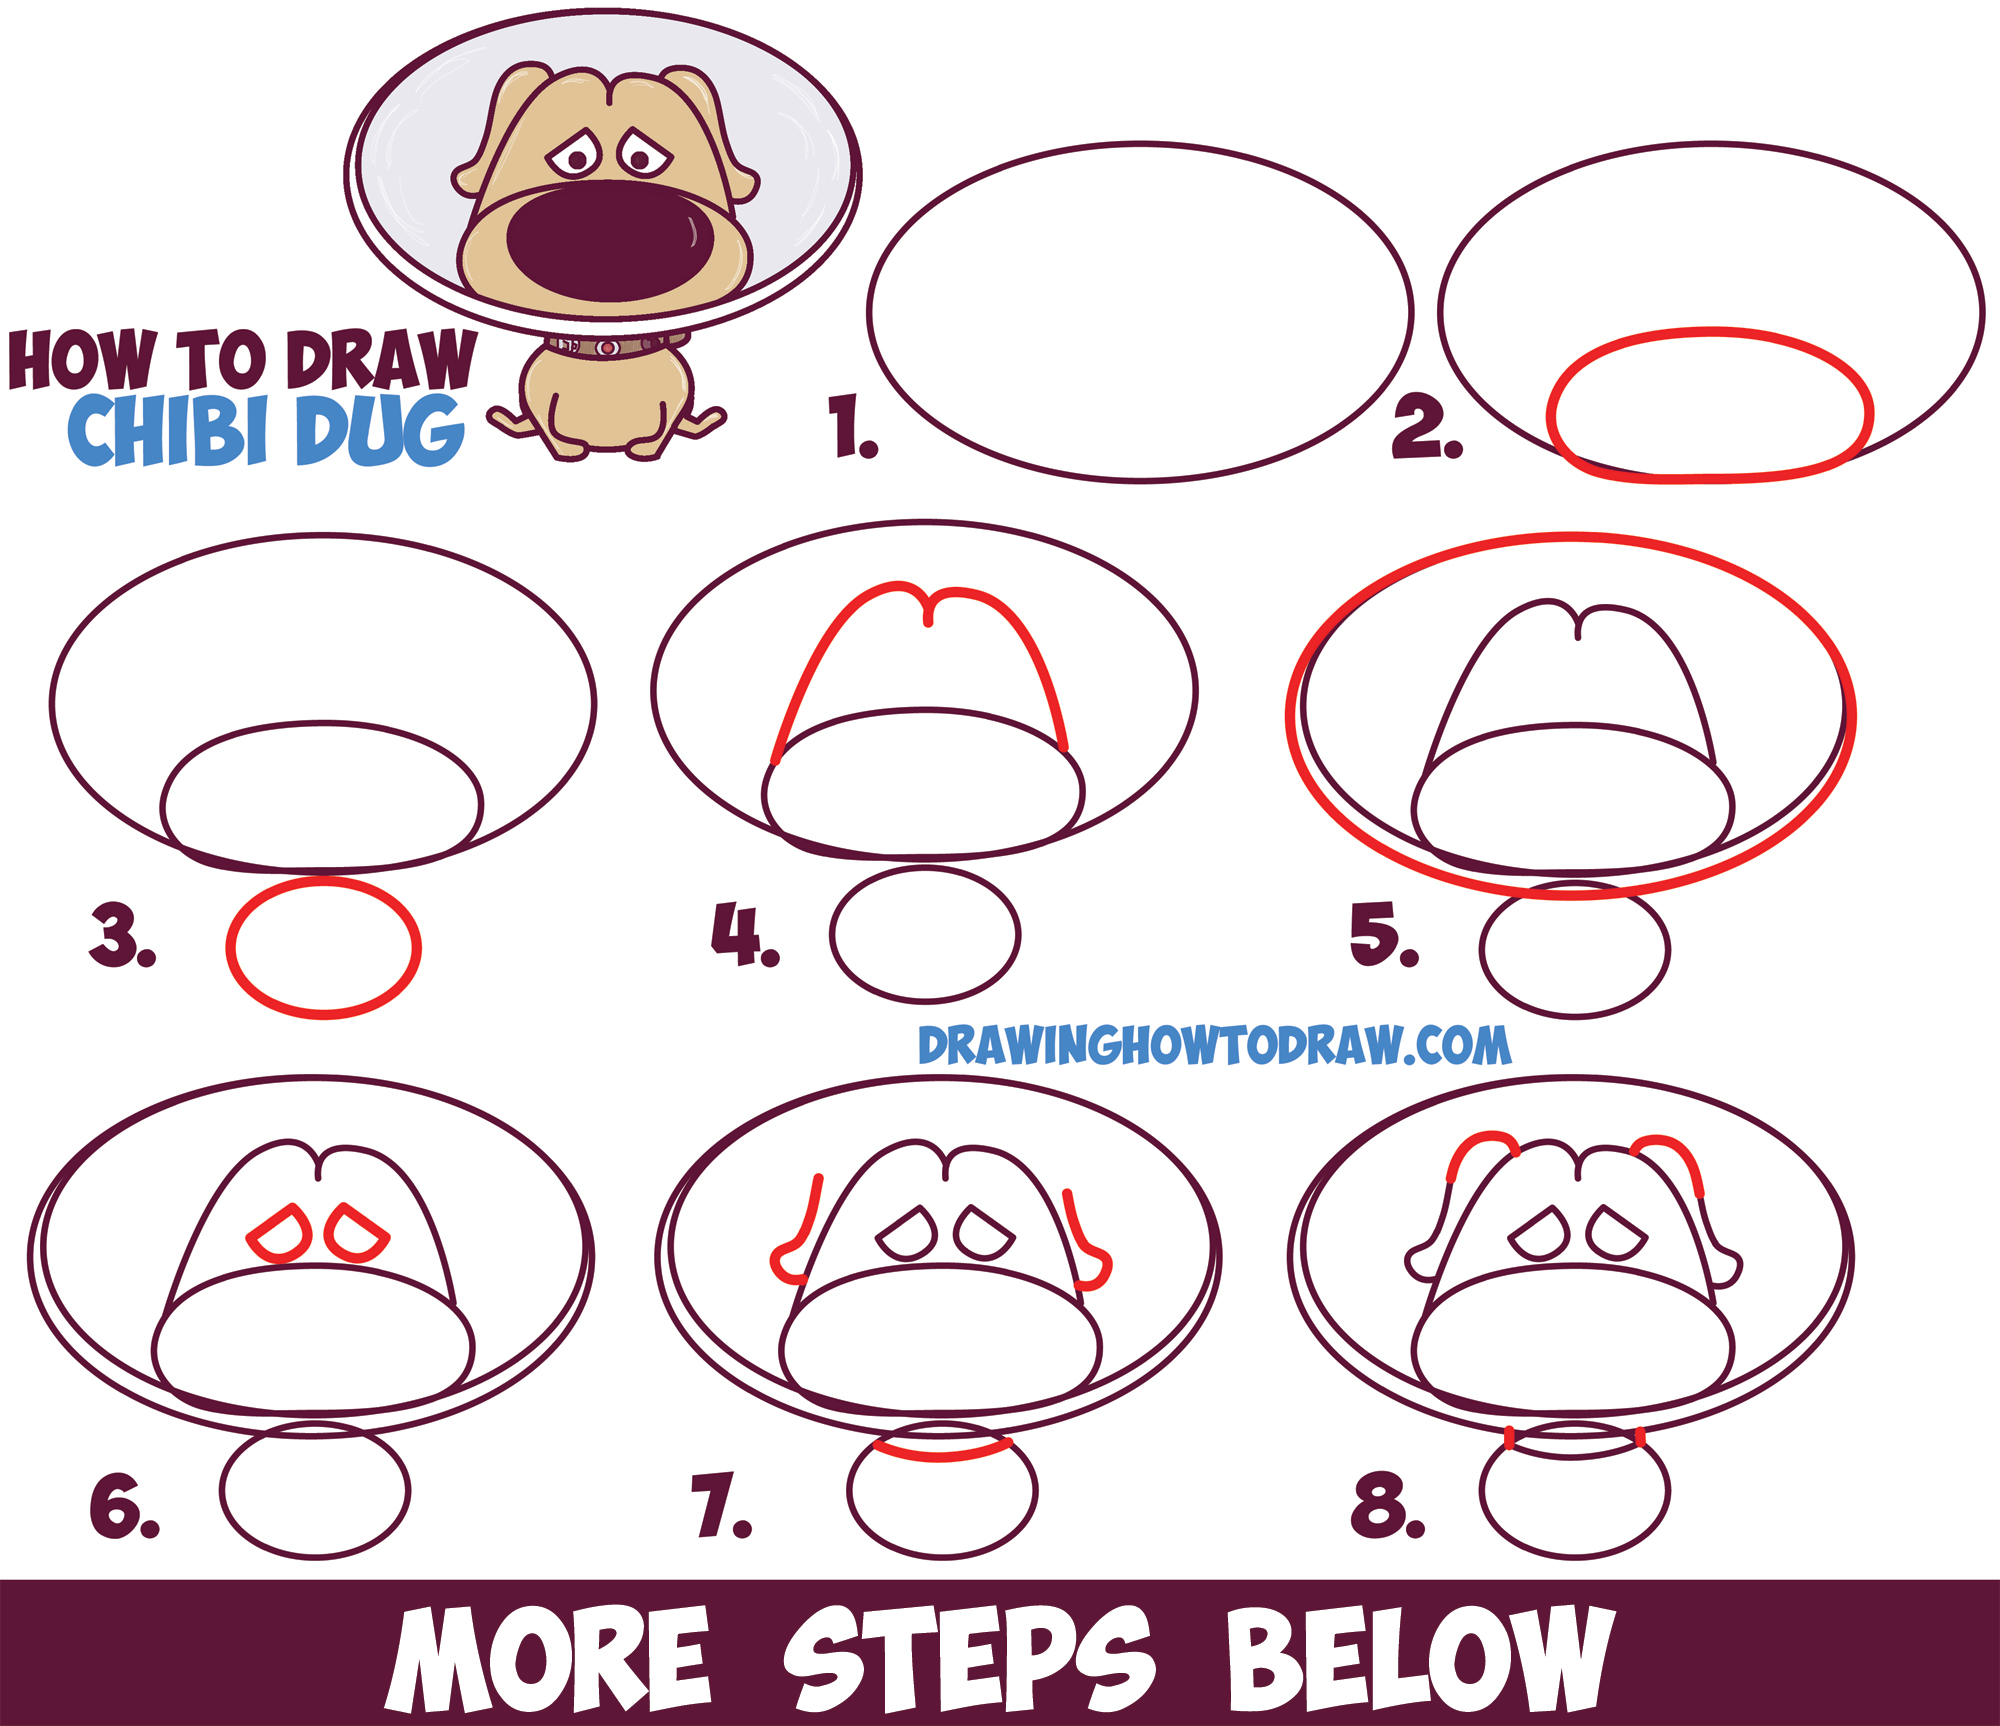 How to Draw Dug (Cute / Kawaii / Chibi) from Up - The Dog from Up in Easy Step by Step Drawing Tutorial